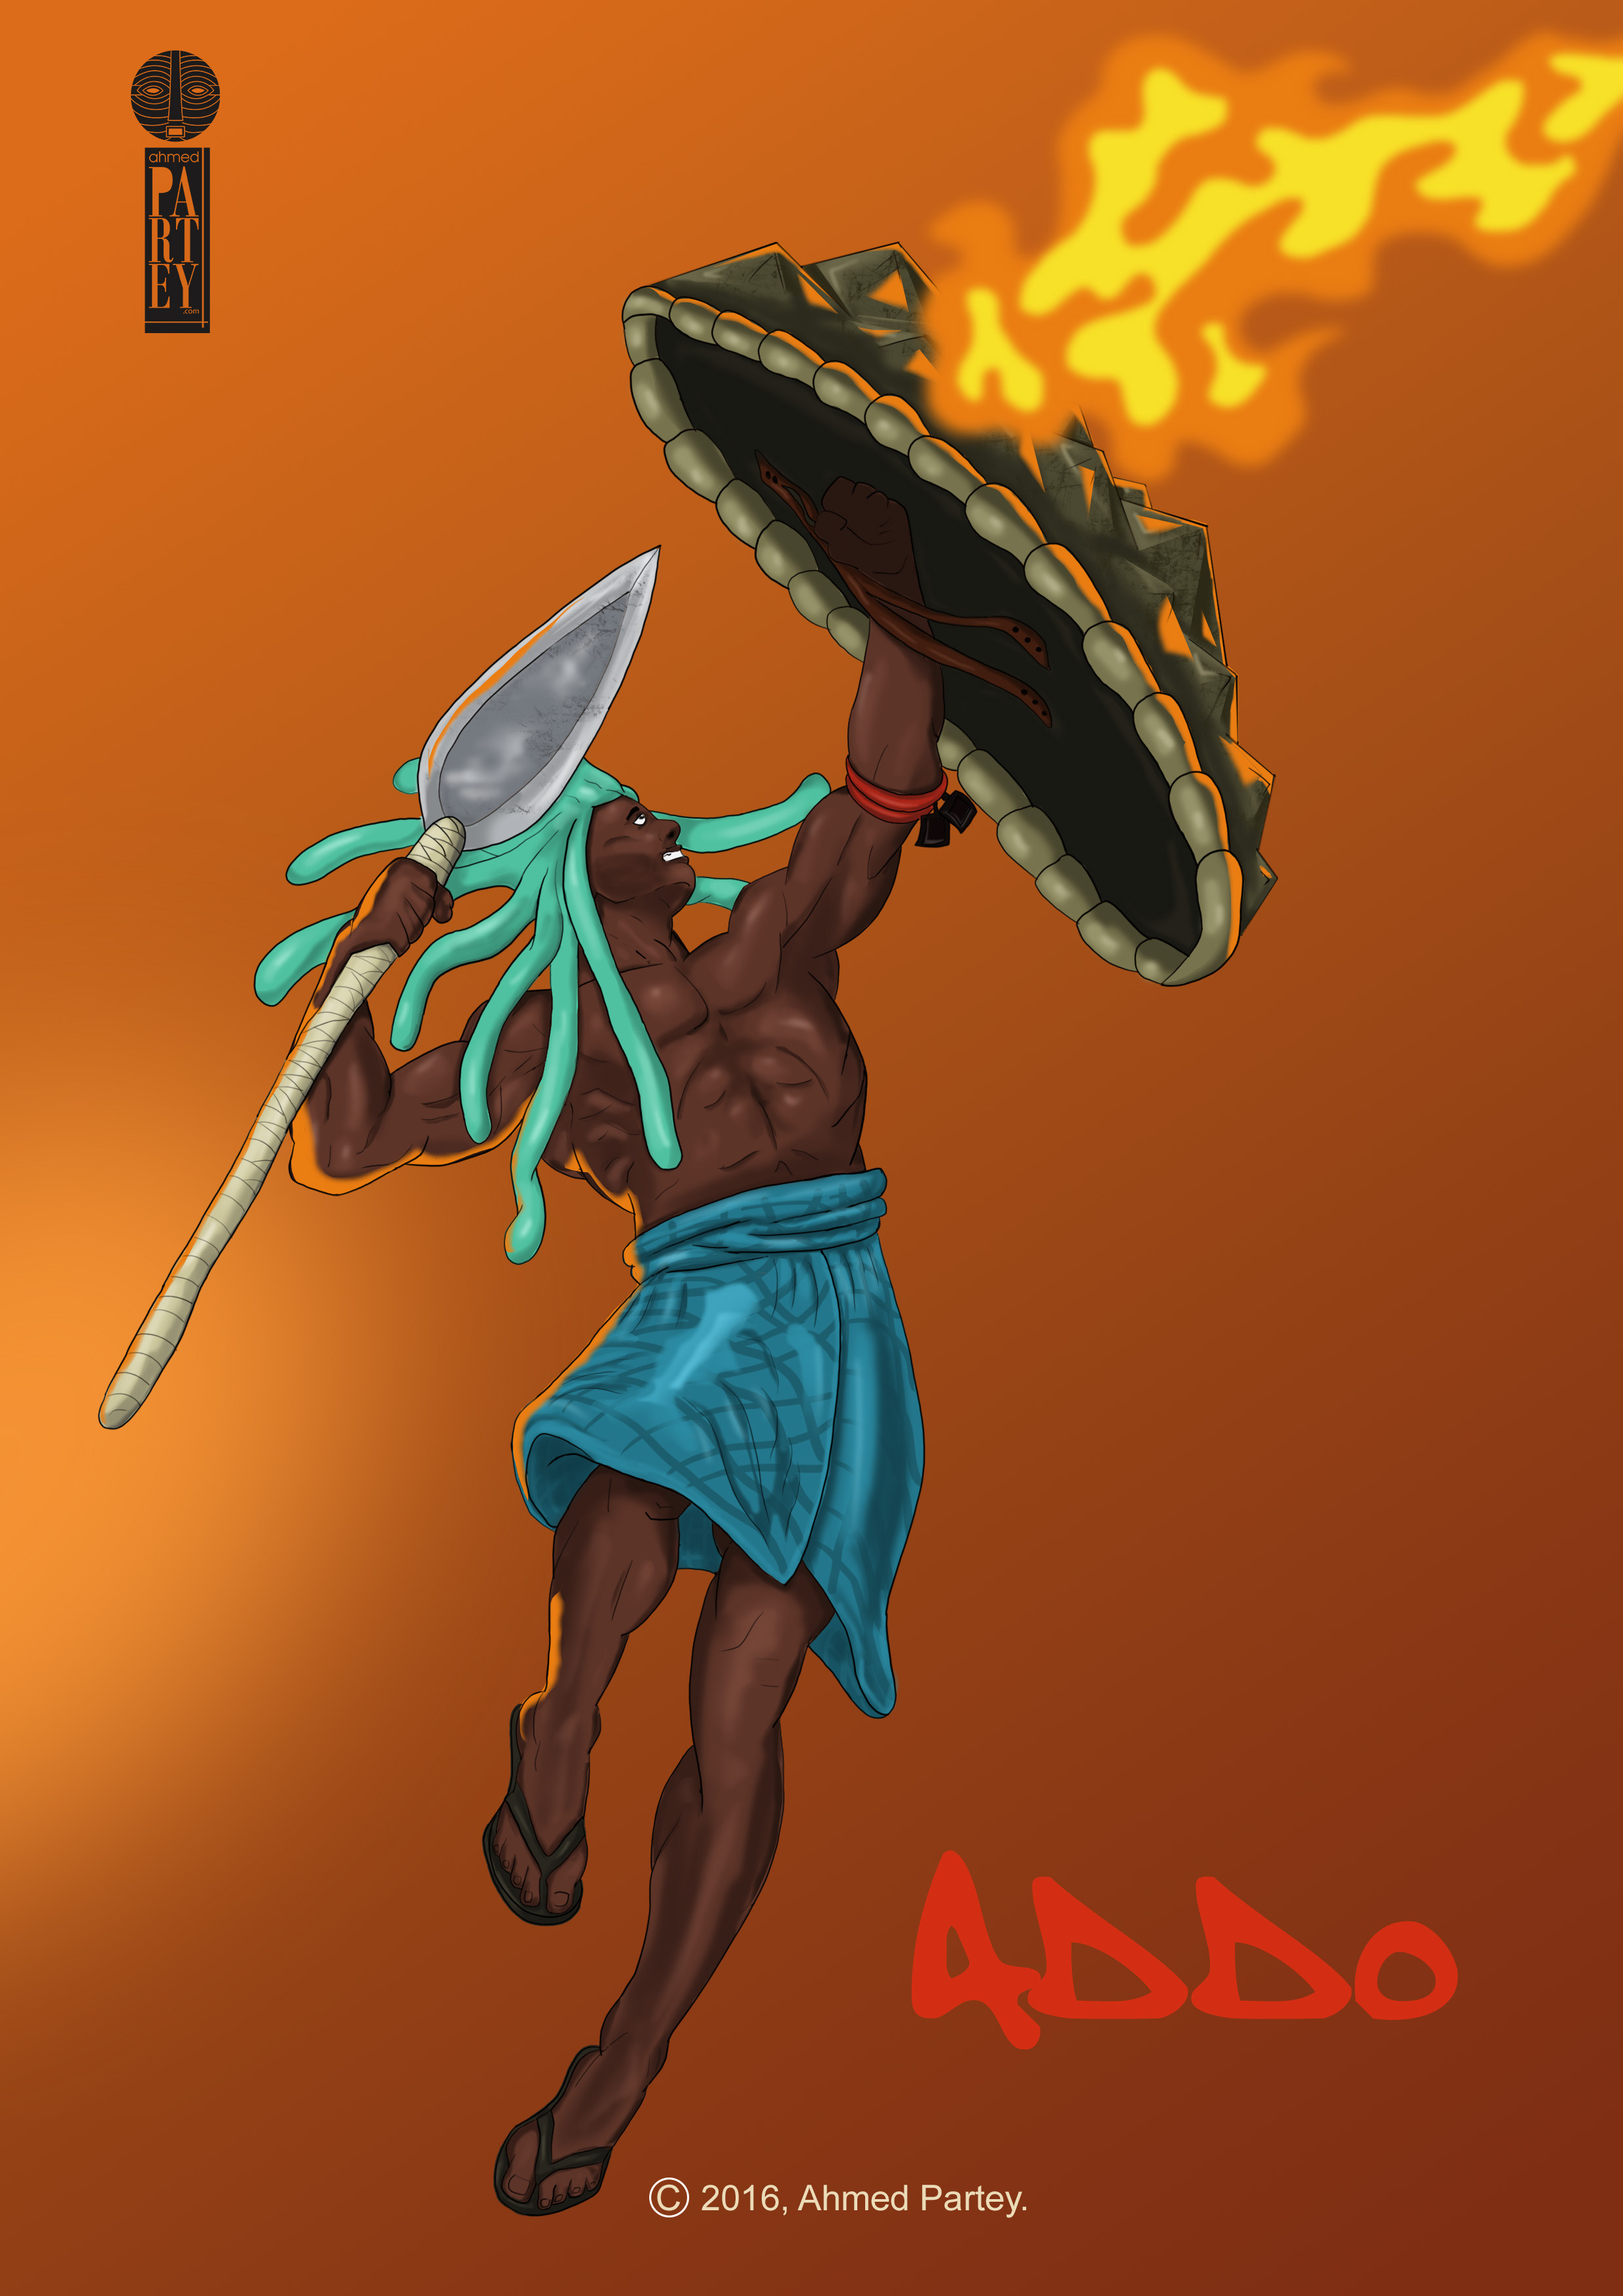 Addo, warriors from an imaginary past.